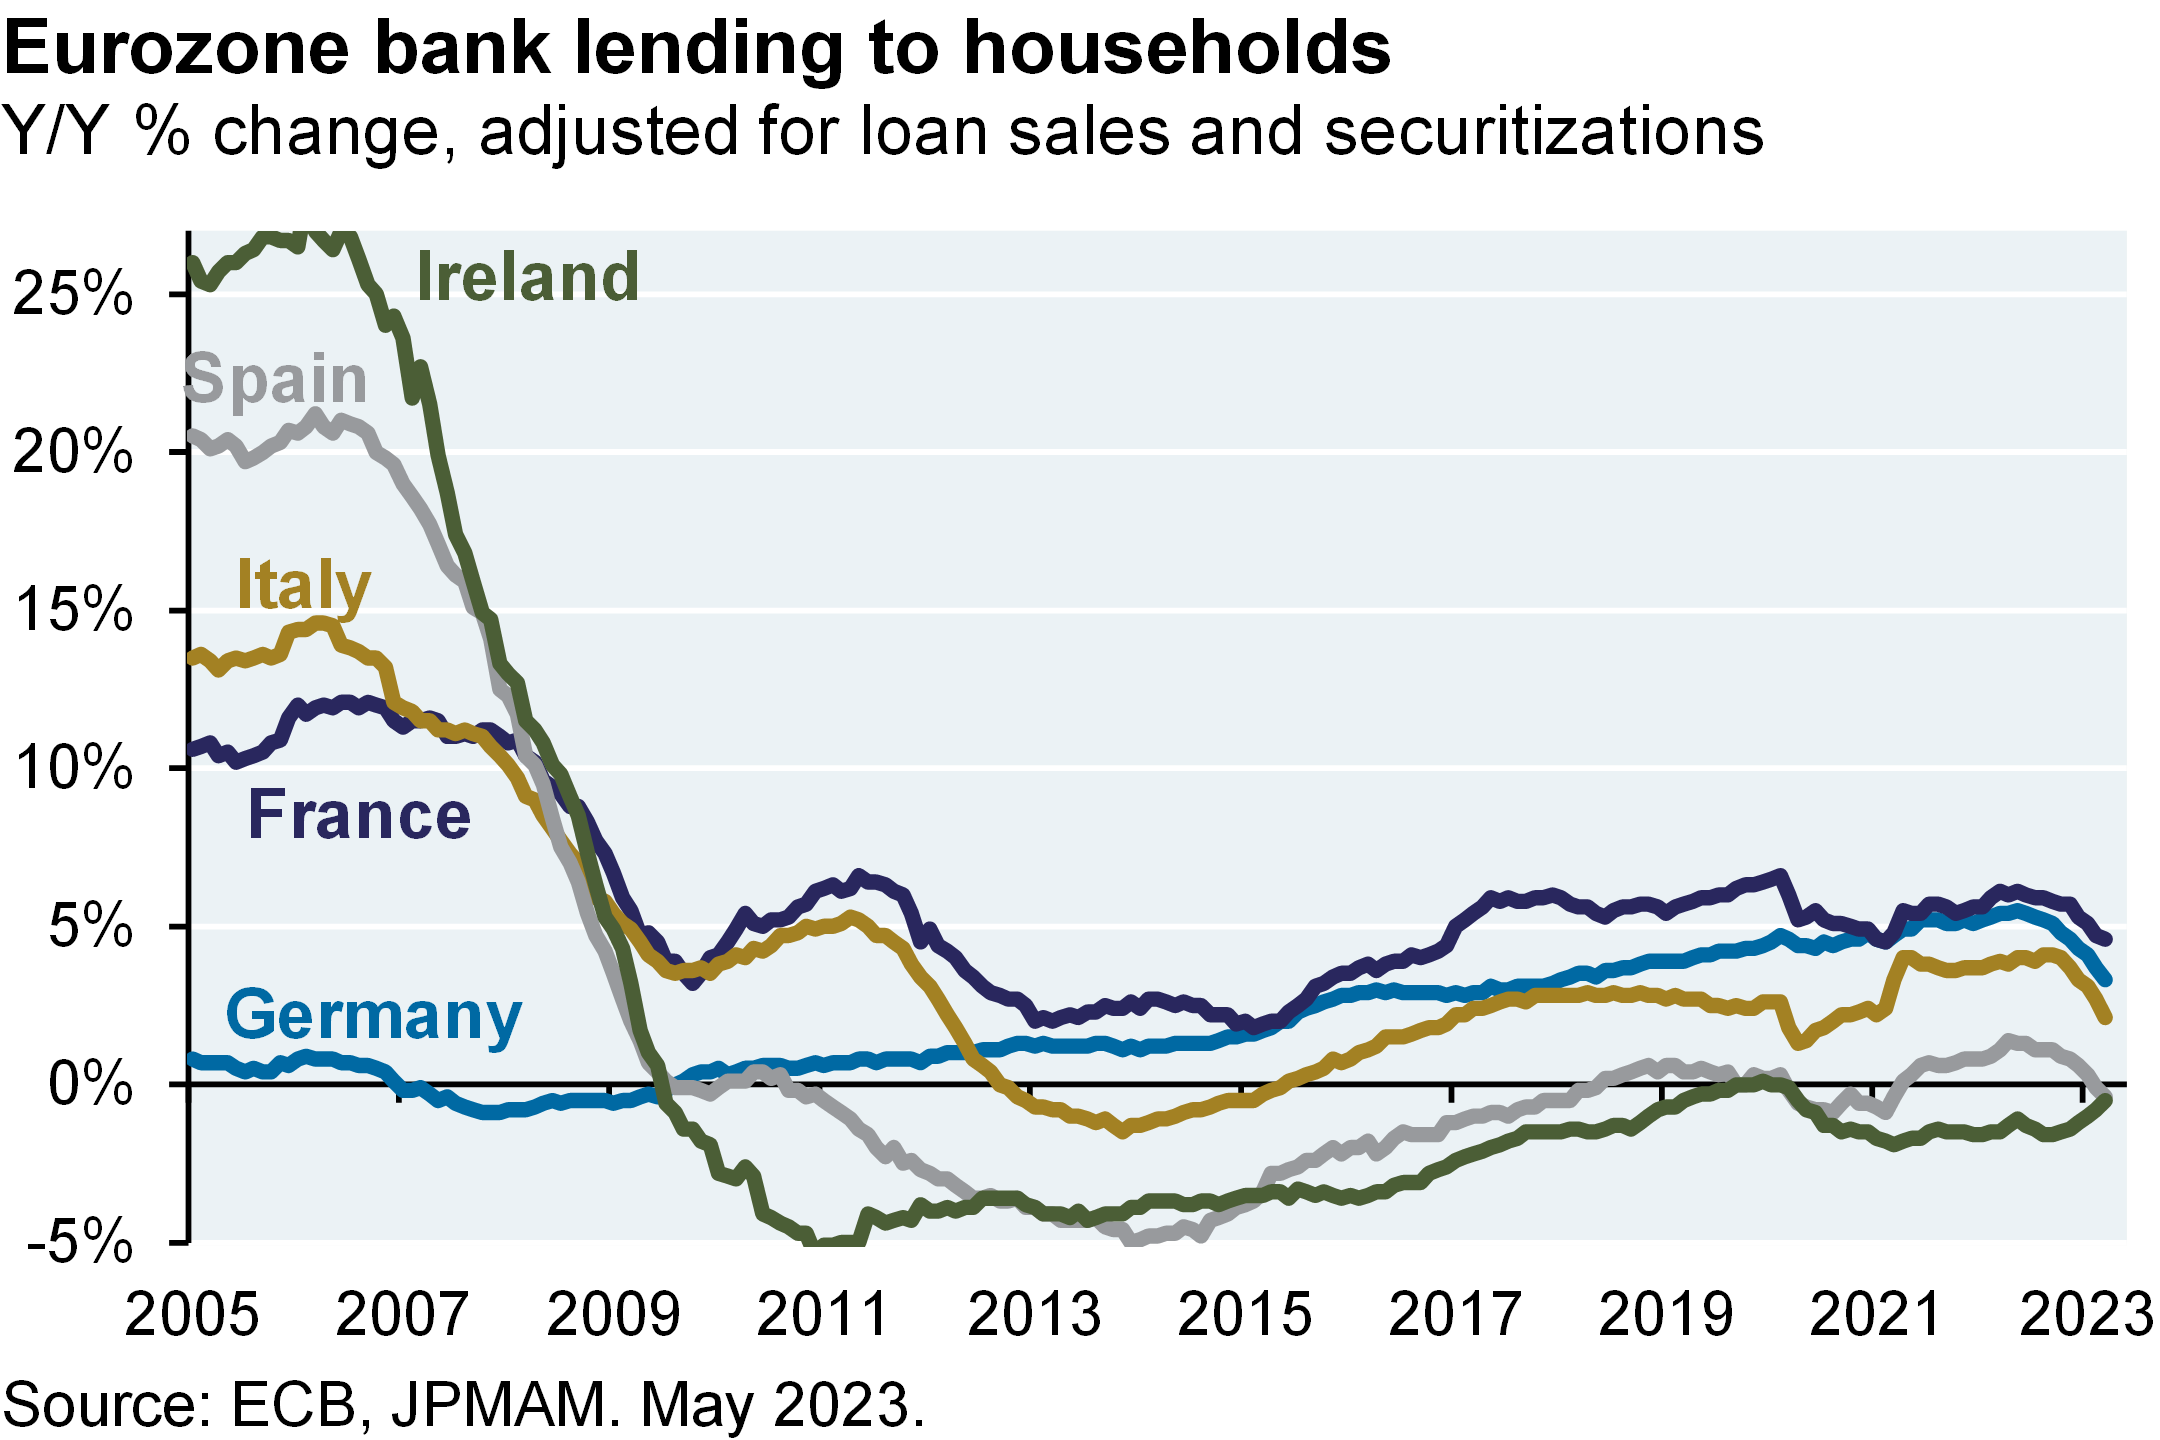 Line chart plots the year-over-year percent change in bank lending to households from 2005 to present for five countries in the Eurozone: Spain, Ireland, Italy, Germany and France. Bank lending to households has not recovered from 2005-2007 levels.